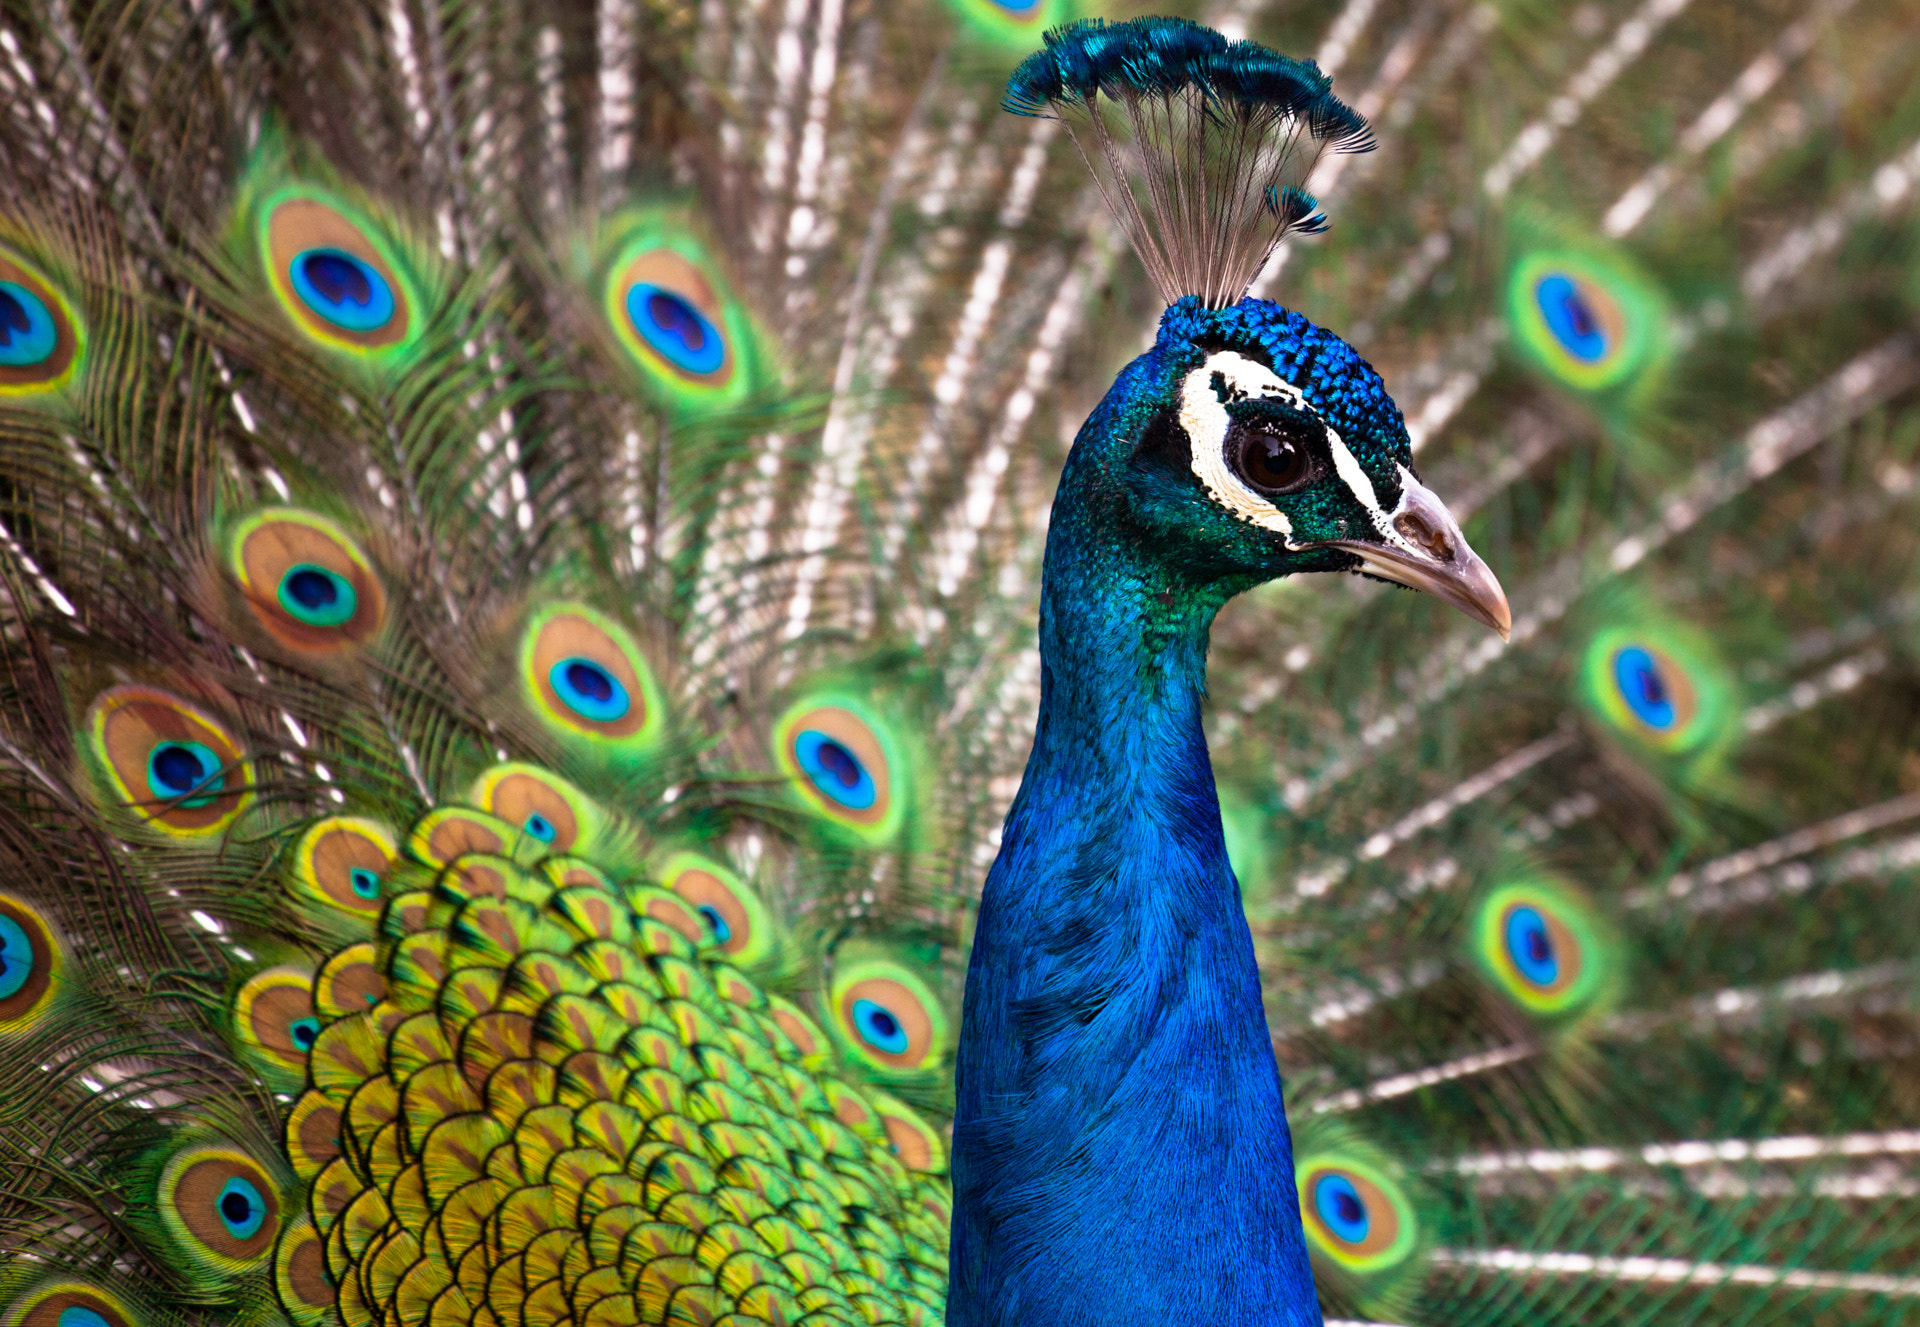 File:Ghi, pettingzoo (escaped peacock - not school pecock!)3.jpg -  Wikimedia Commons